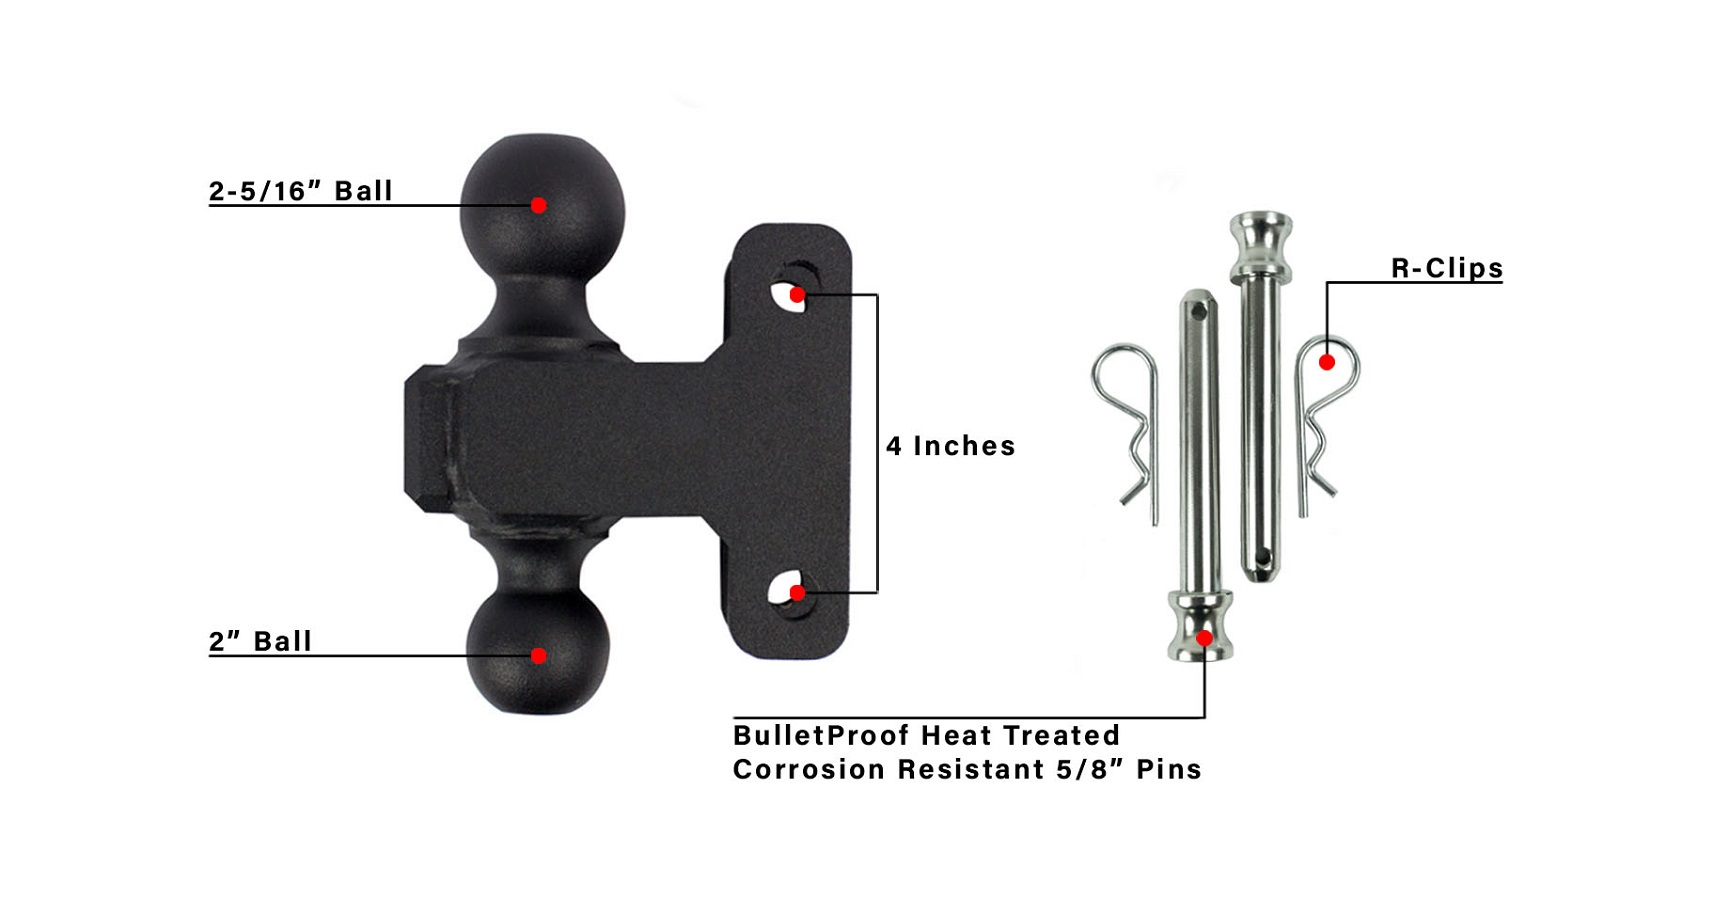 Dual Ball and Corrosion Resistant Pins Description